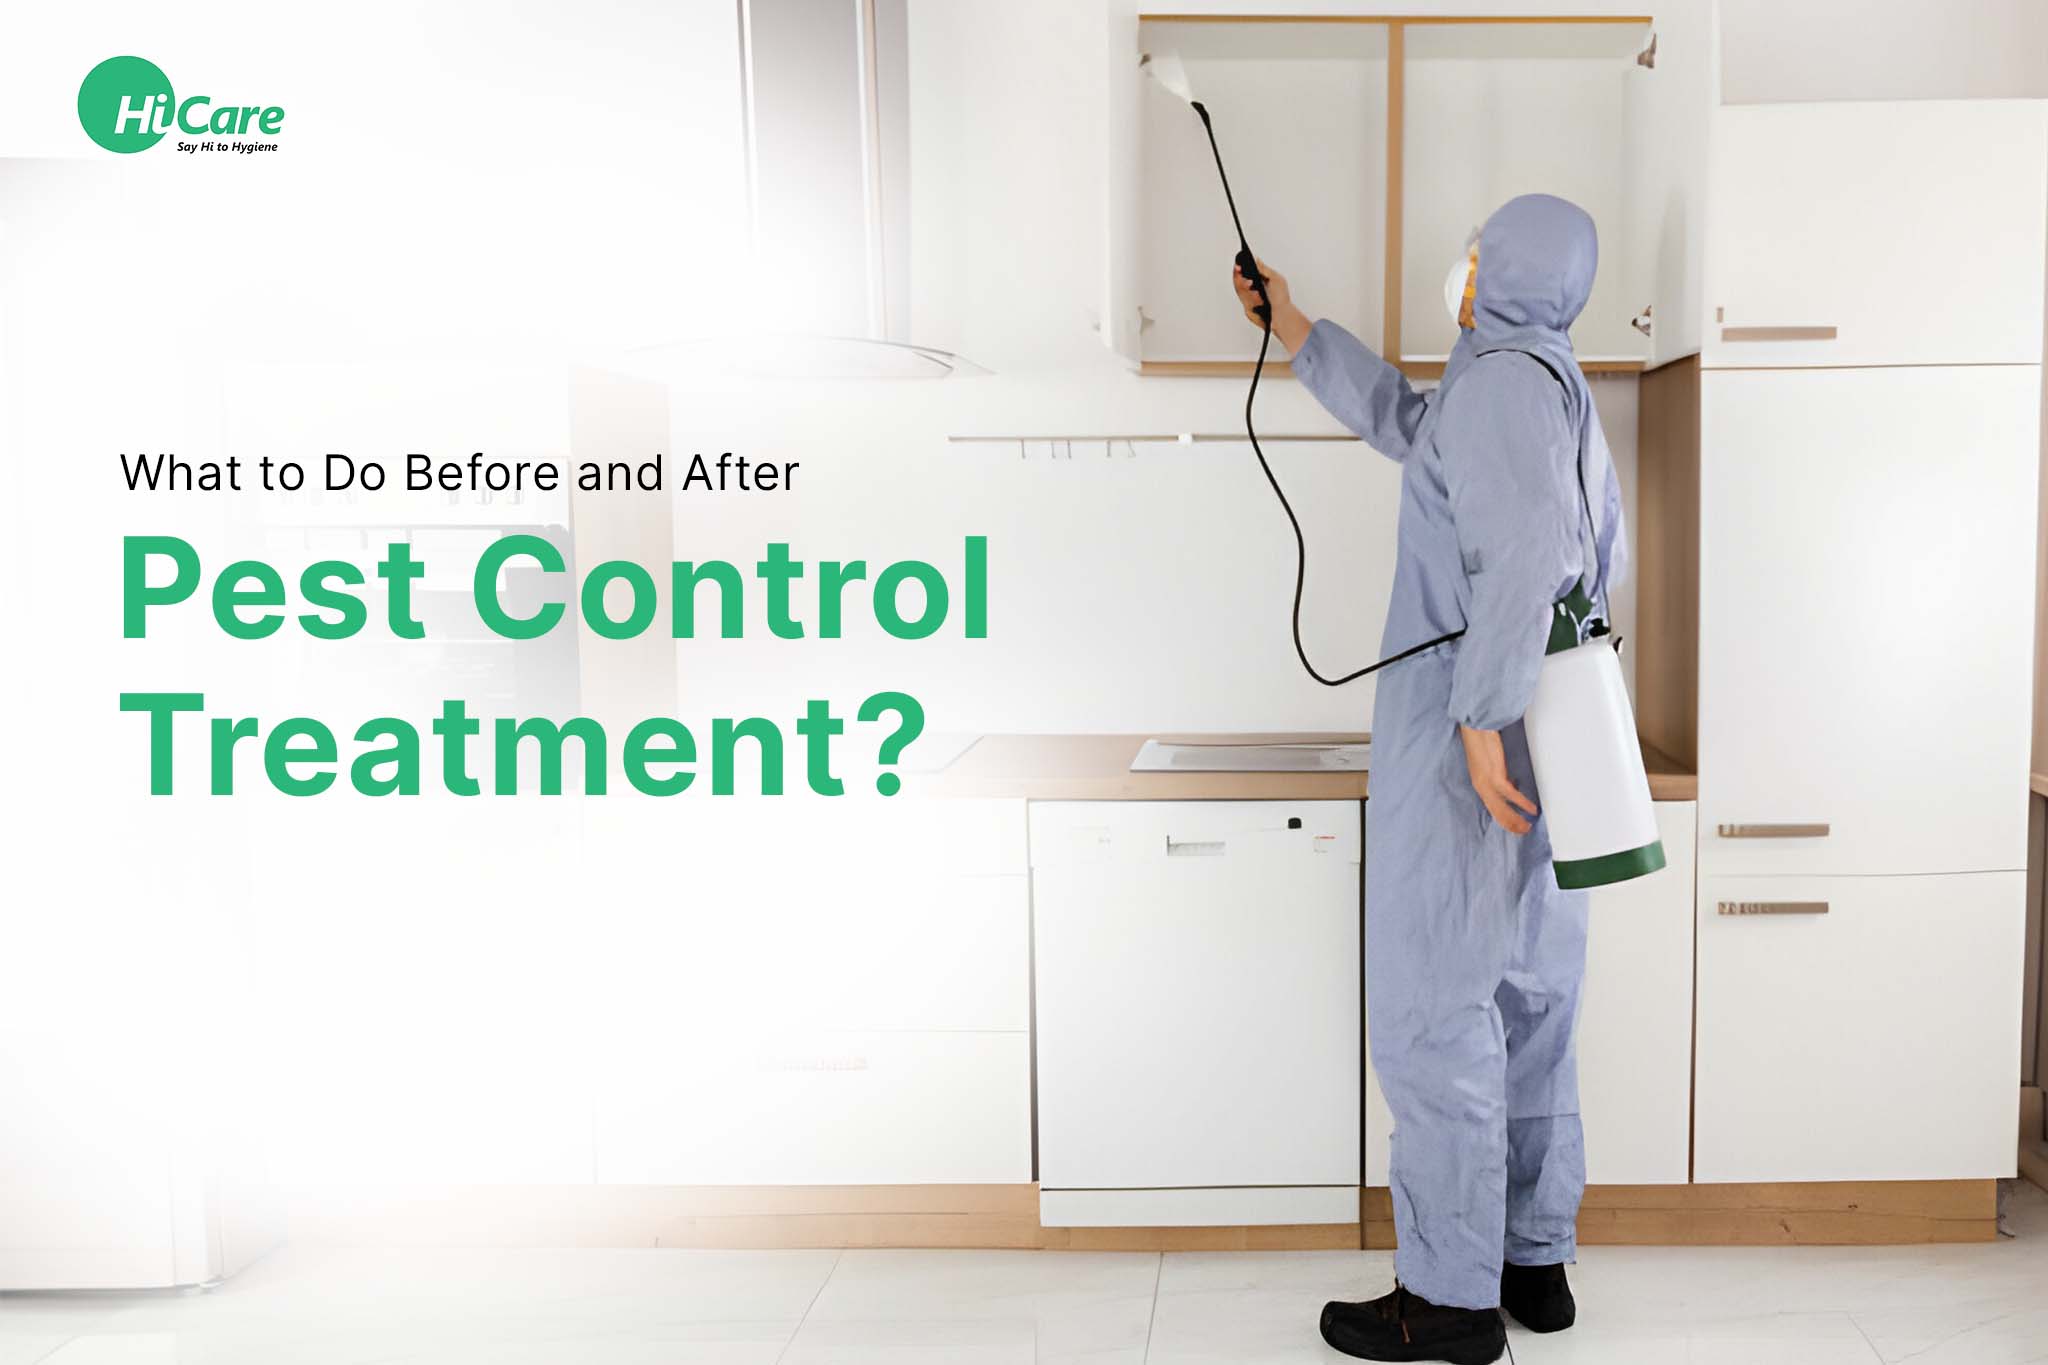 What to Do Before and After Pest Control Treatment?